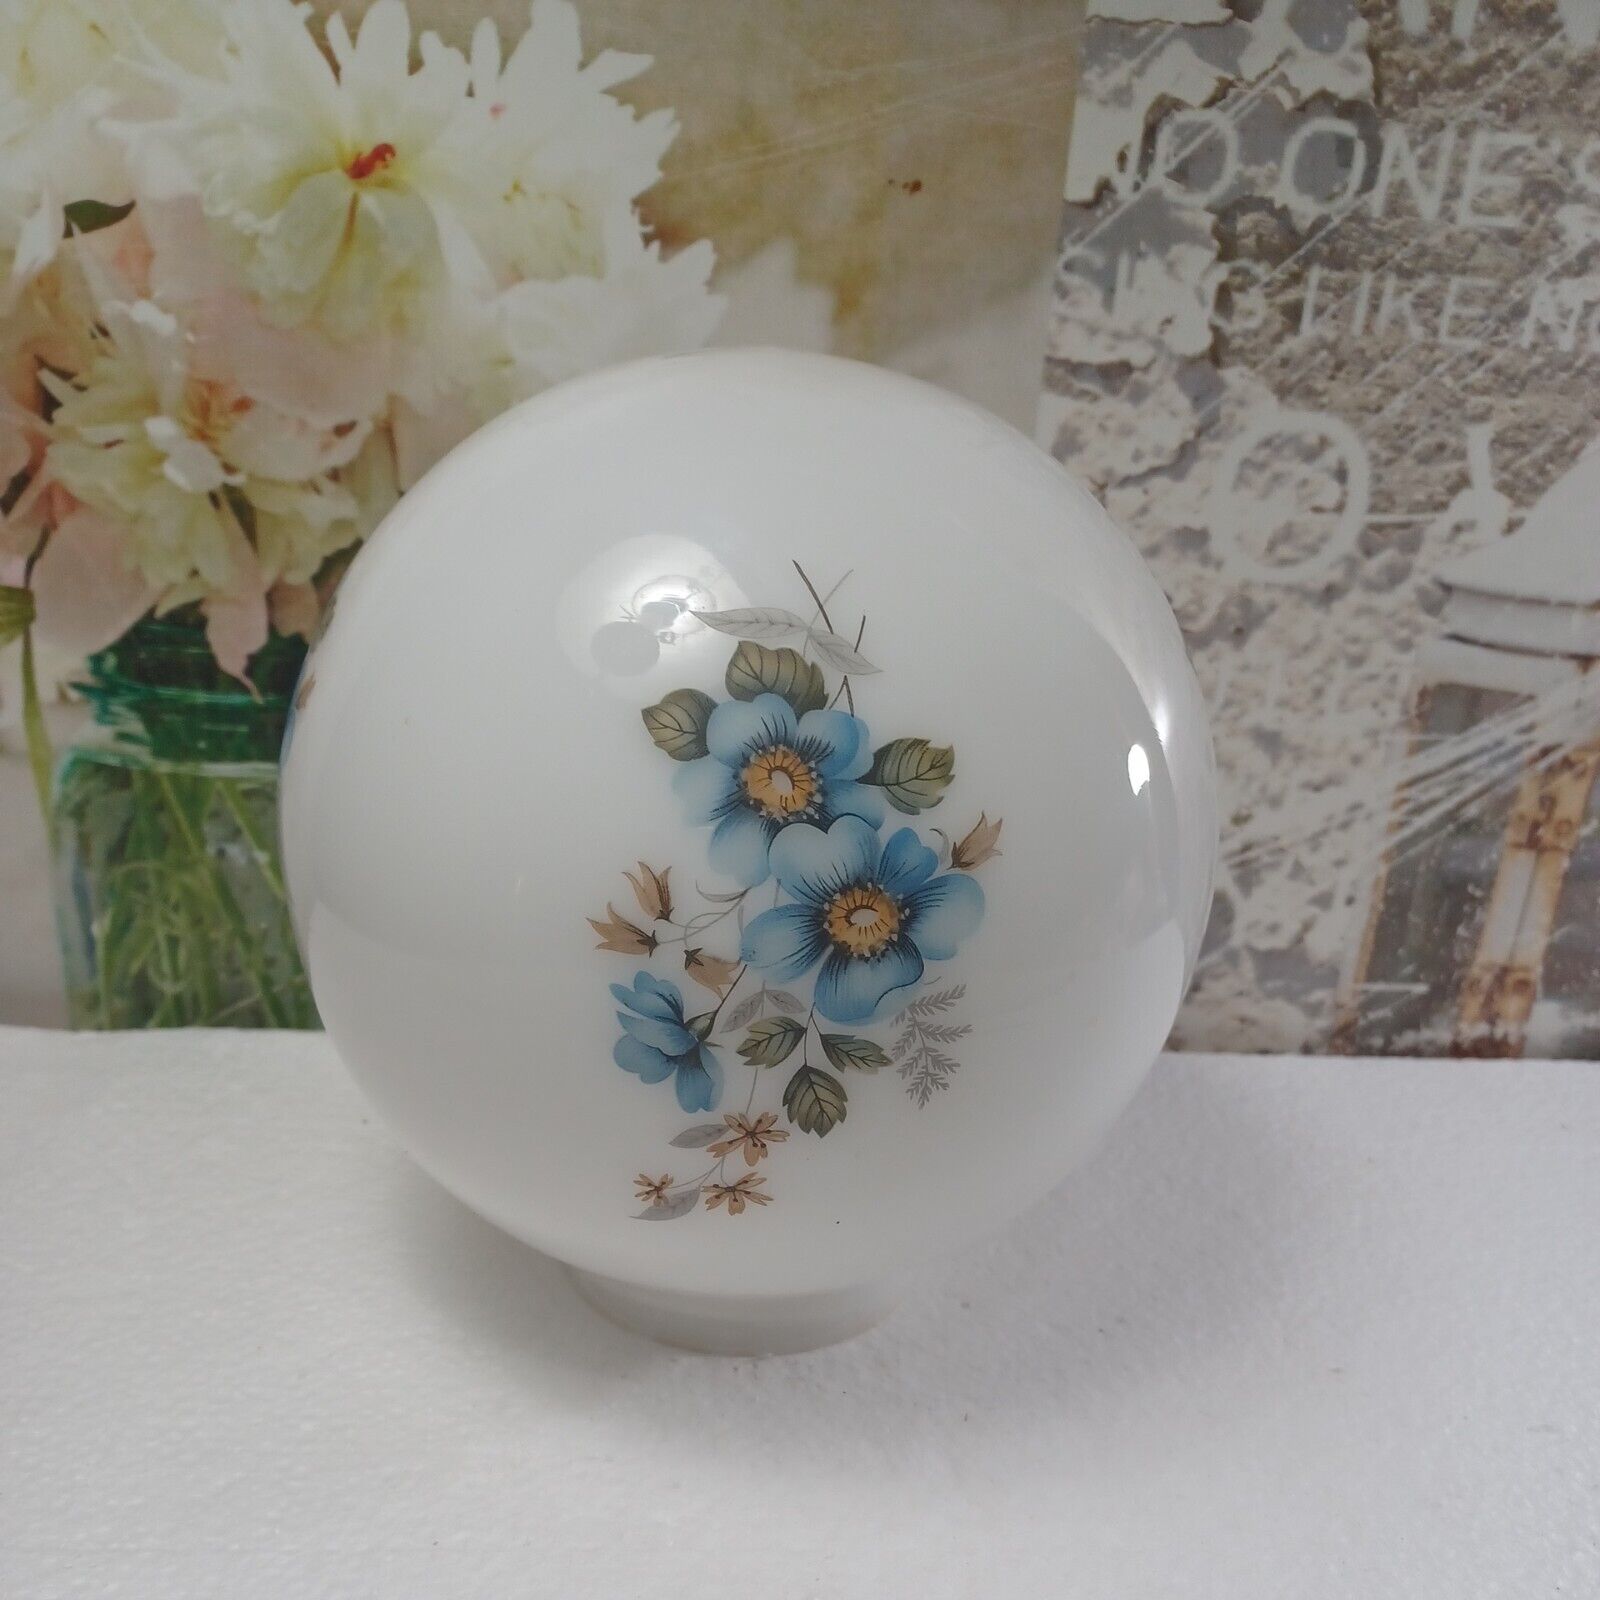 VTG replacement Quoizel Globe Ball Lighting Fixture Shade Blue Brown Floral 3\